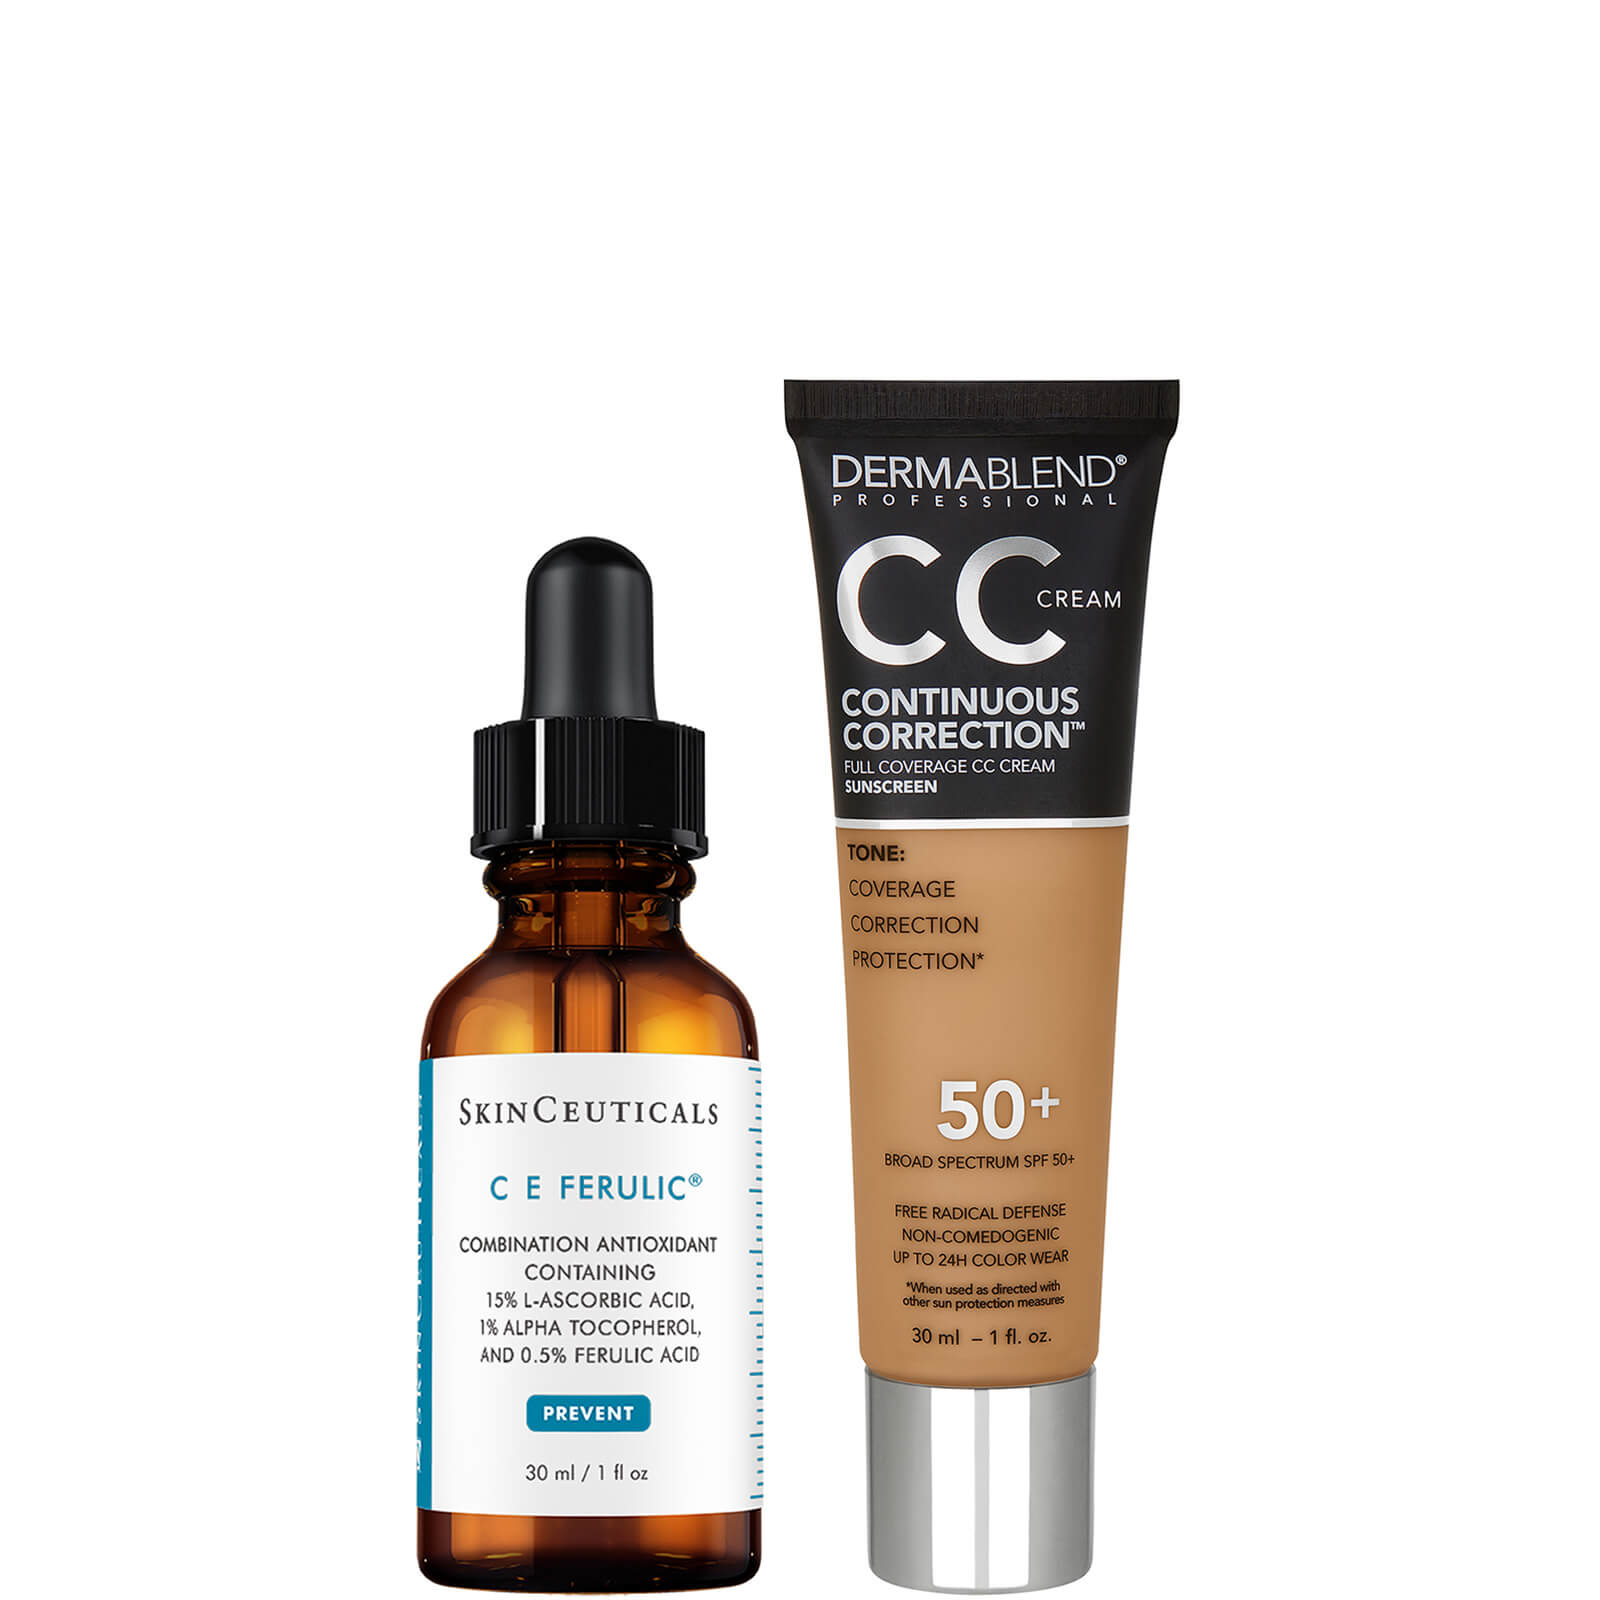 SkinCeuticals and Dermablend Anti-Aging Brightening Duo with Vitamin C and Niacinamide (Various Shades) ($223 Value) - 50N Tan 1